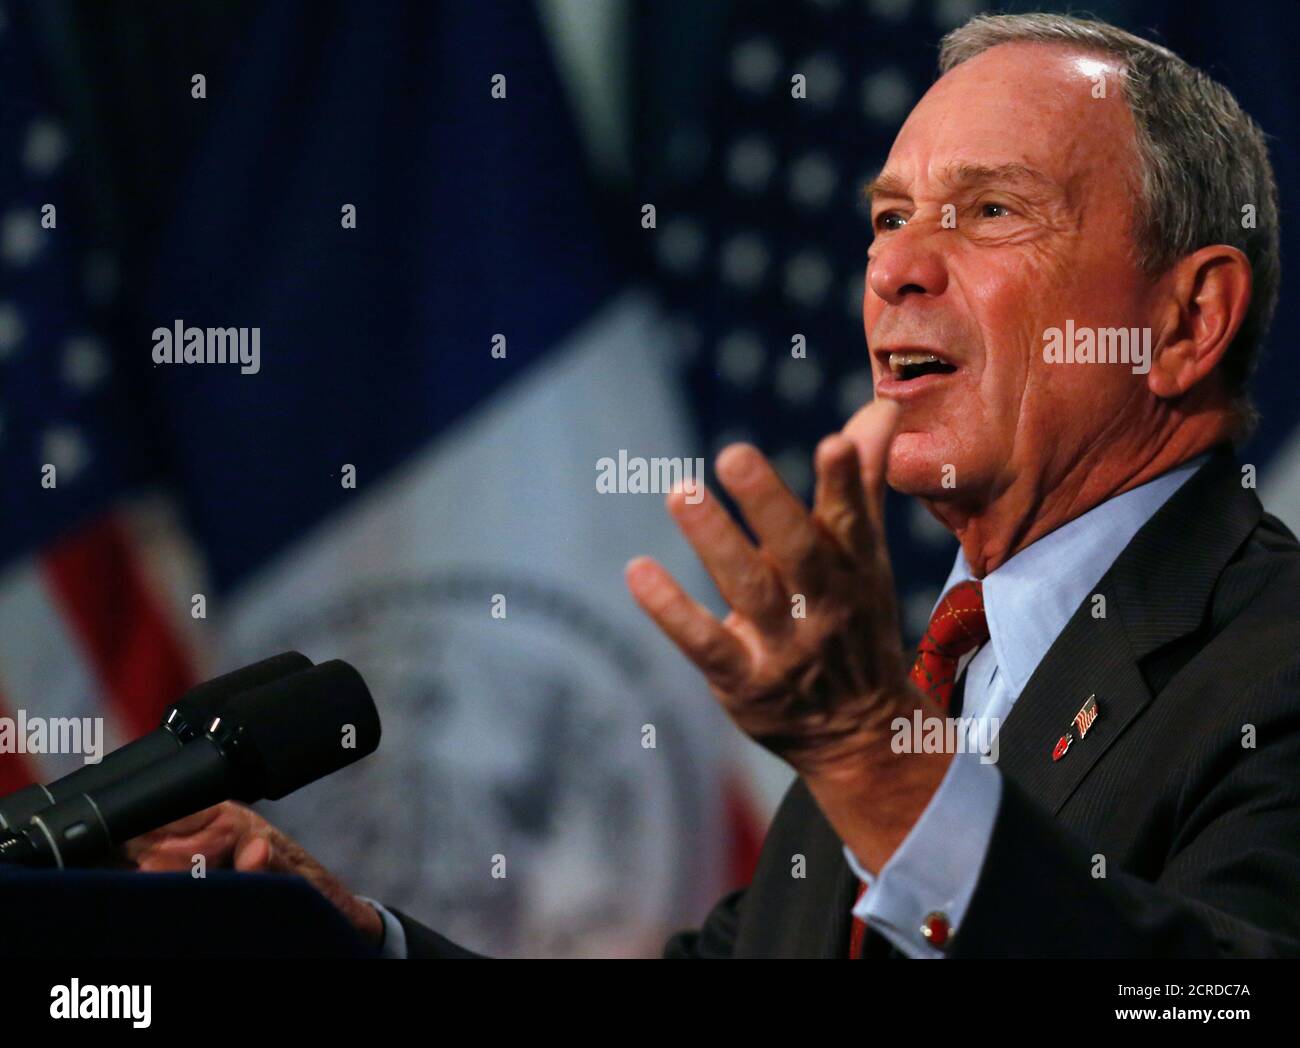 New York City Mayor Michael Bloomberg gestures while speaking to the media about a judge's ruling on 'stop and frisk' at City Hall in New York August 12, 2013. Bloomberg said he would appeal a federal judge's ruling on Monday that the police department's 'stop and frisk' crime-fighting tactics violate constitutional rights, arguing that the practice drove down the city's crime rate. REUTERS/Brendan McDermid (UNITED STATES  - Tags: POLITICS CRIME LAW) Stock Photo